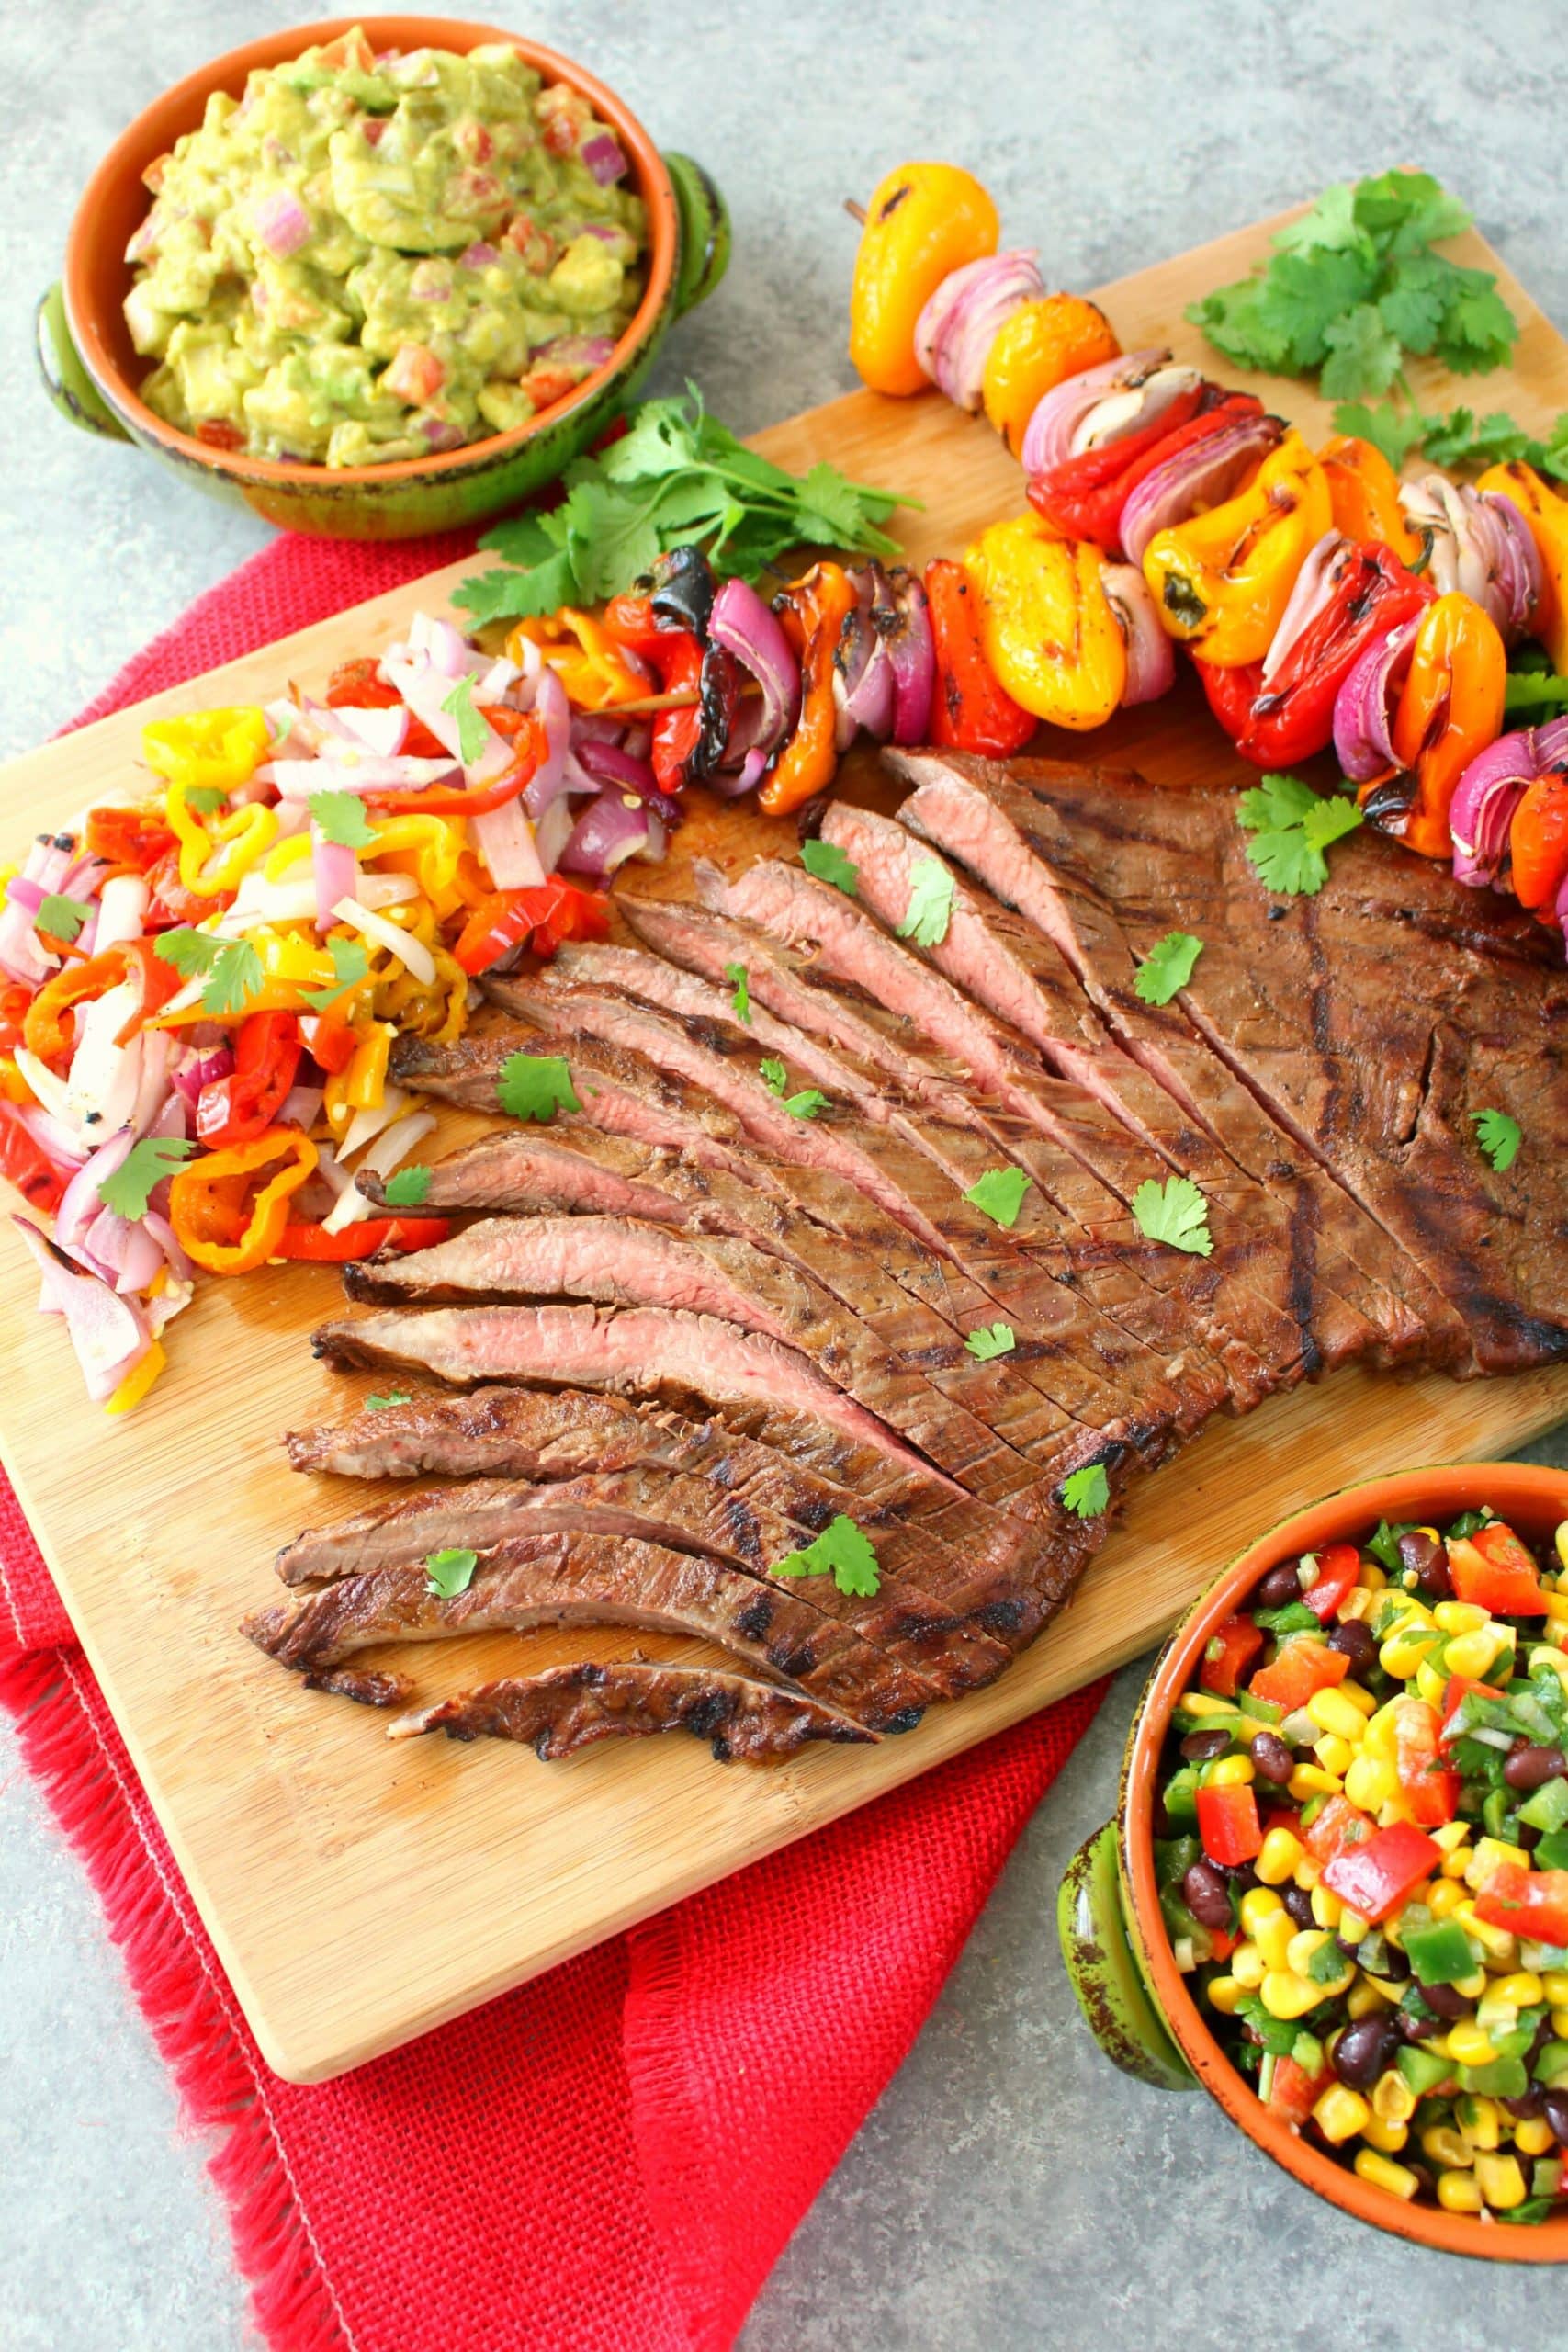 Grilled steak fajitas on cutting board with grilled peppers and onions.